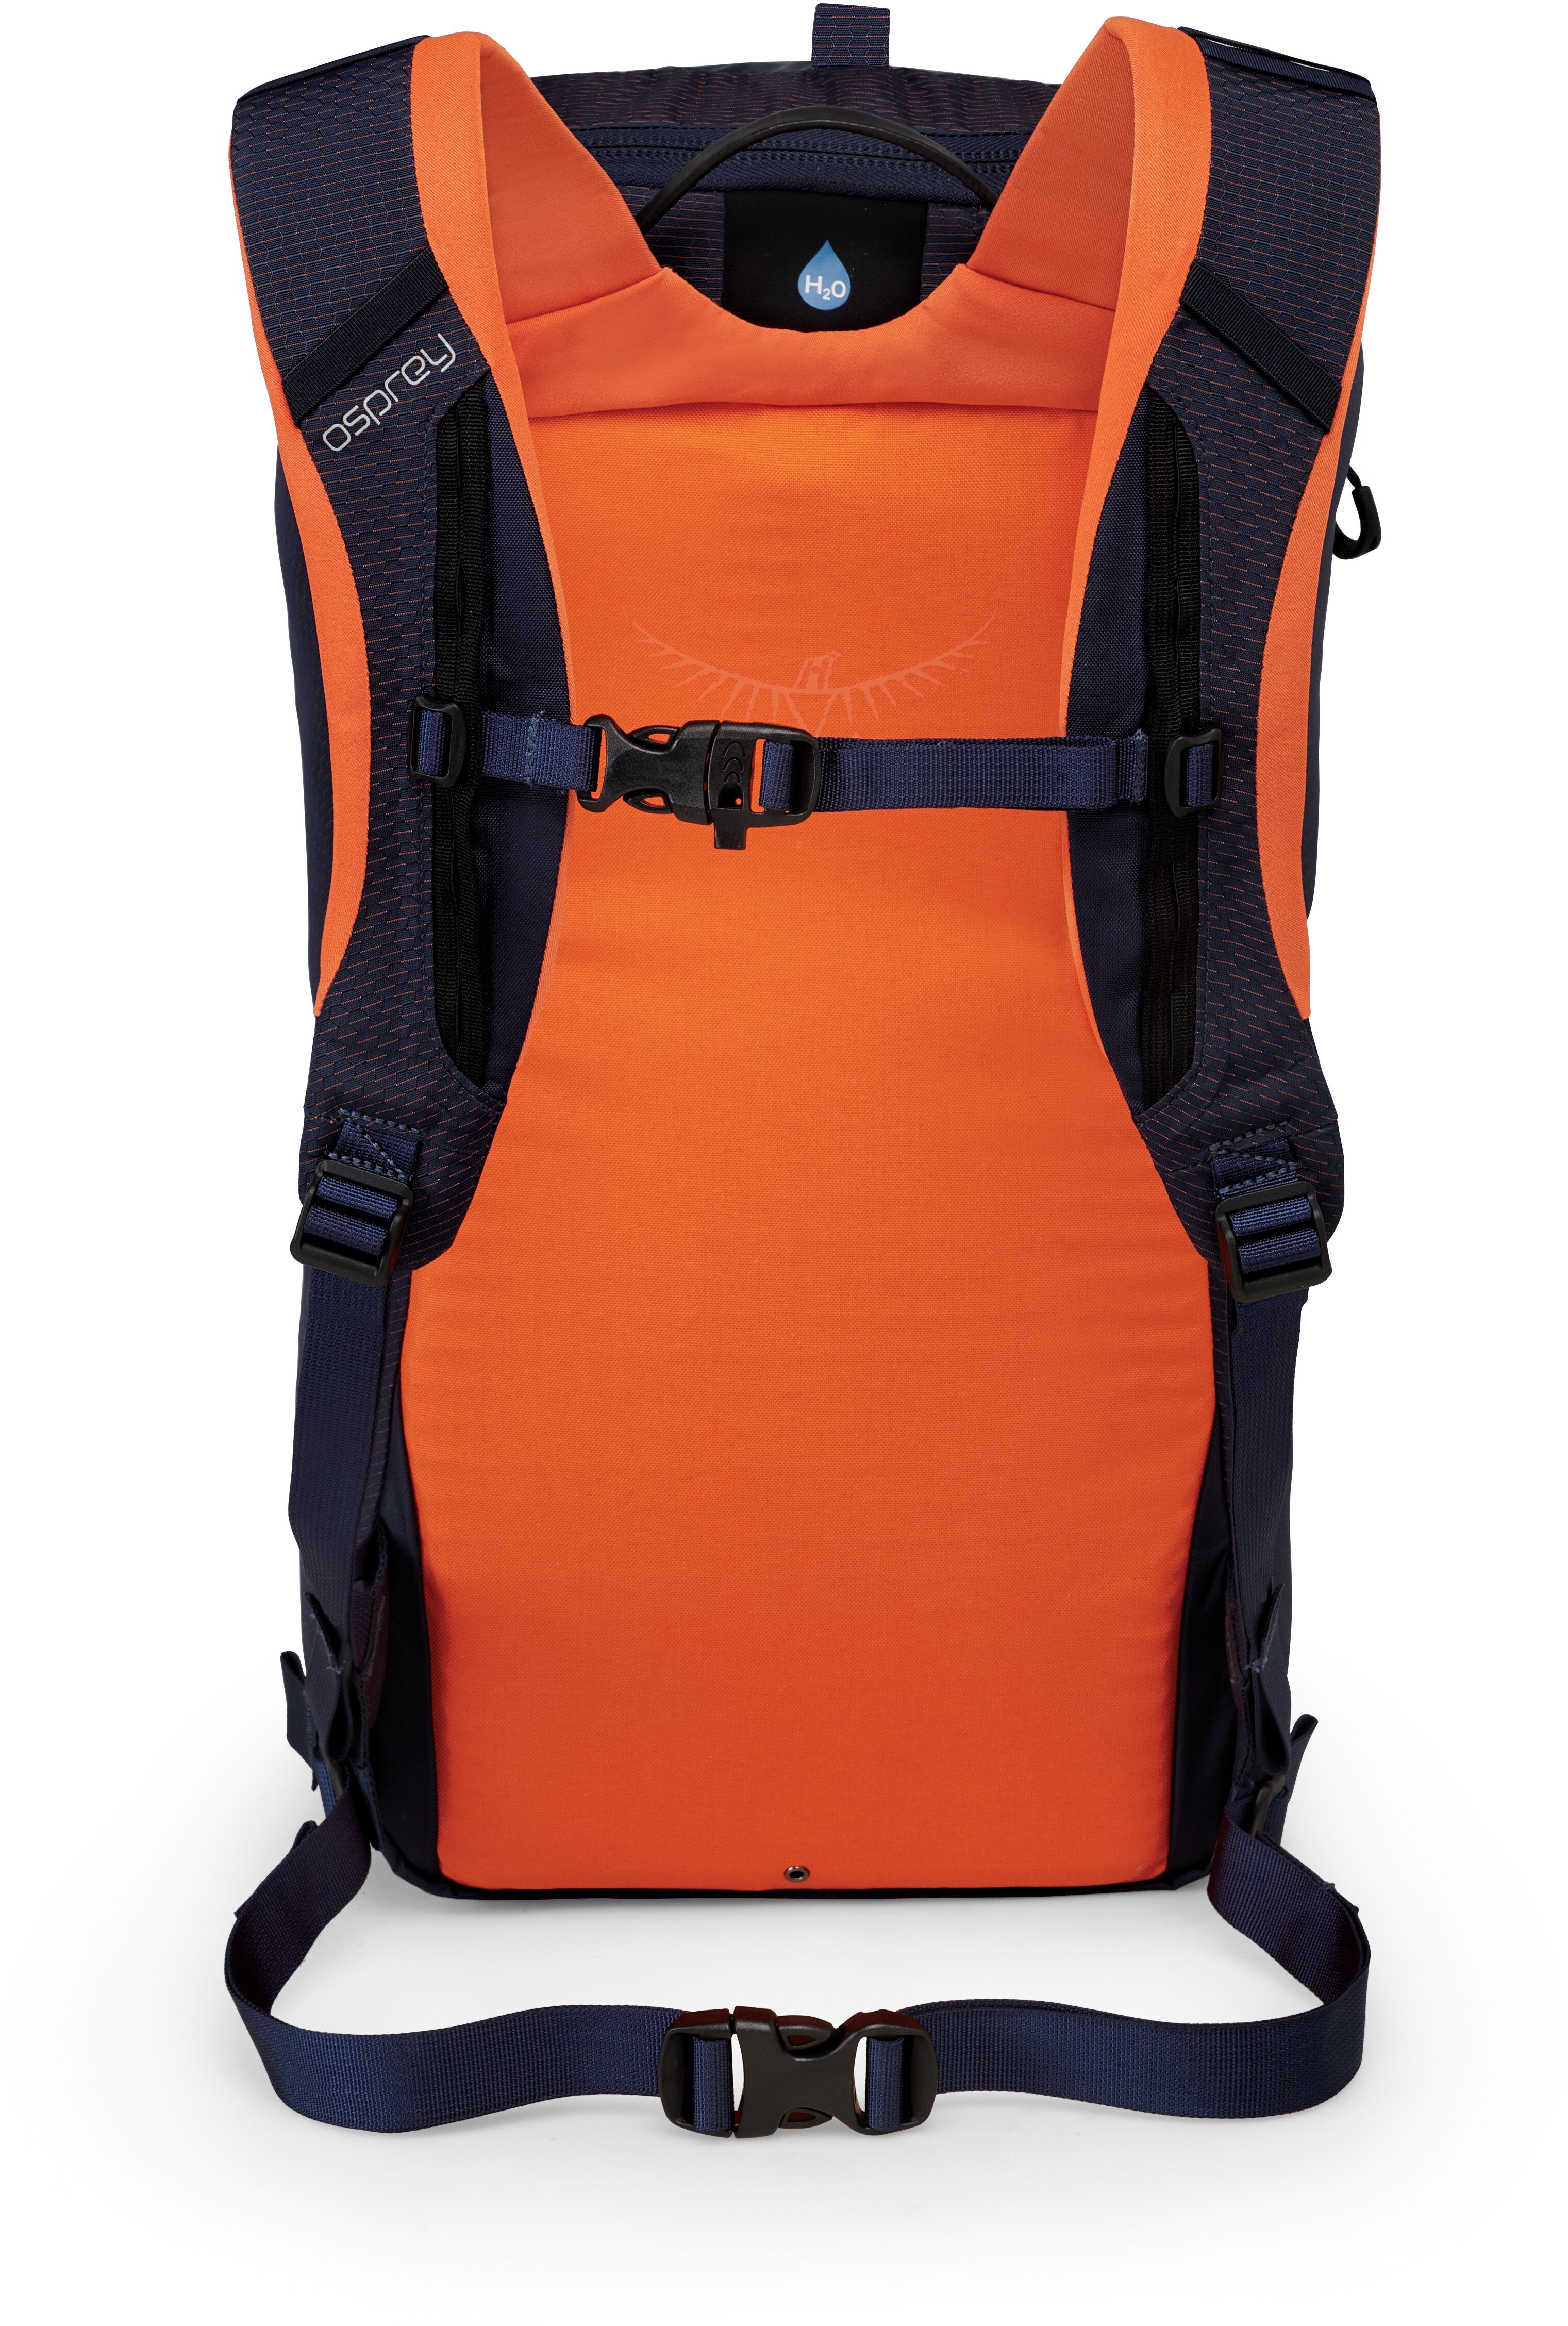 Osprey Mutant 22 Backpack blue fire at addnature.co.uk